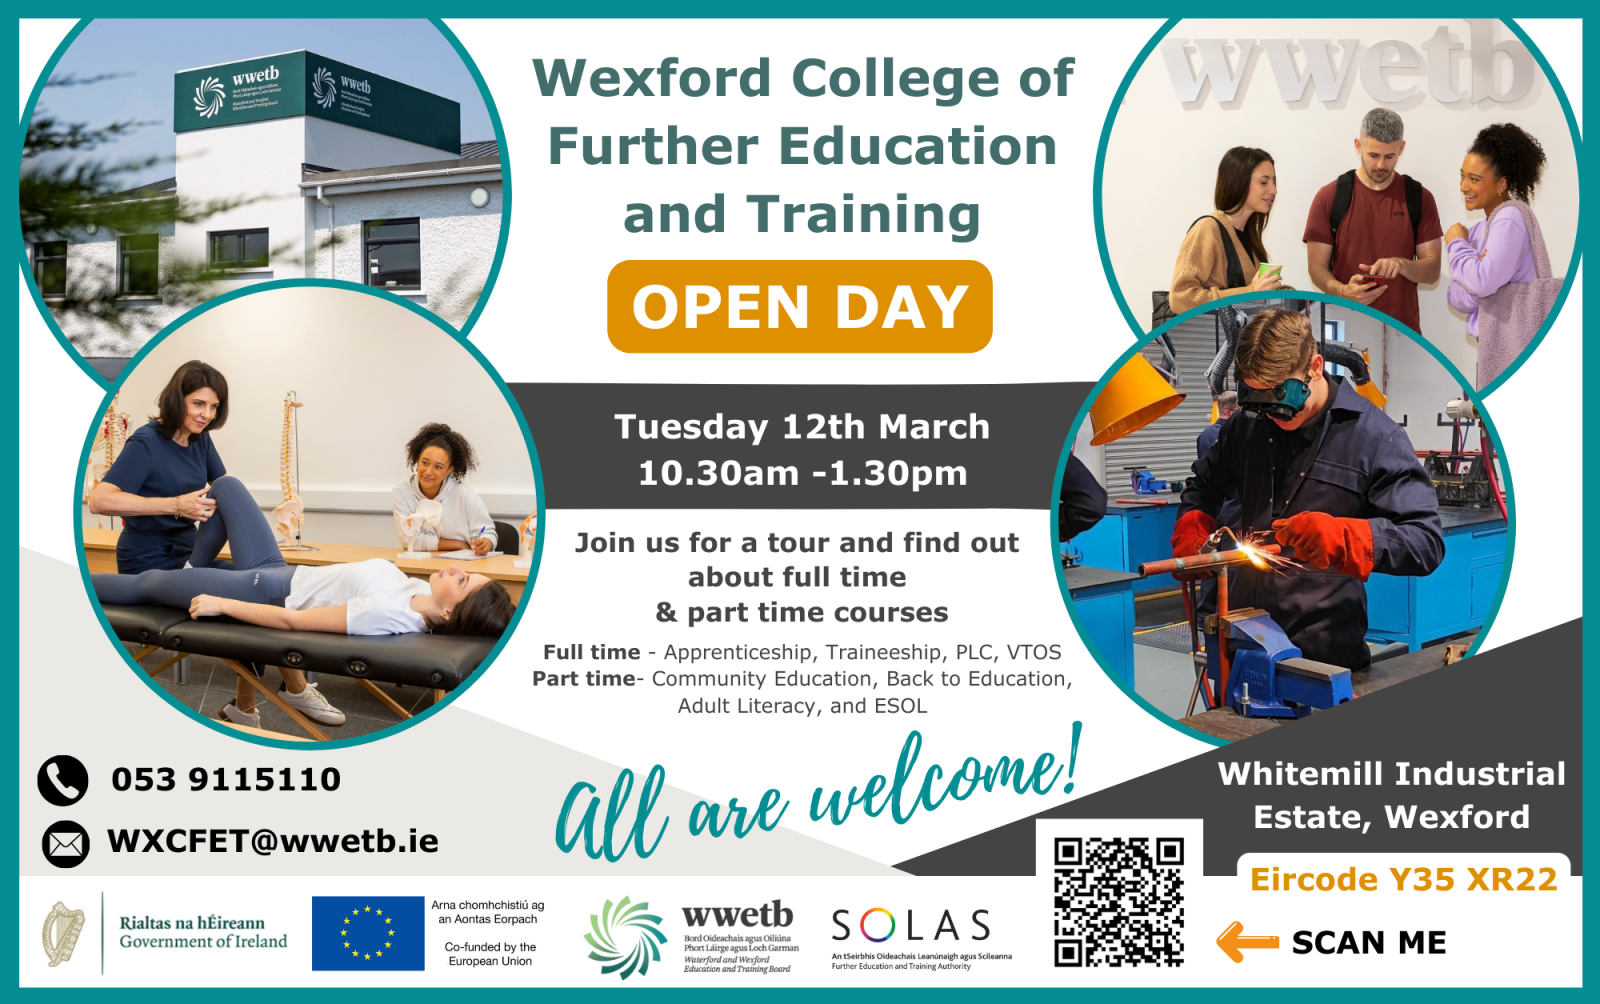 First Open Day for Wexford College of Further Education and Training 12th March 2023